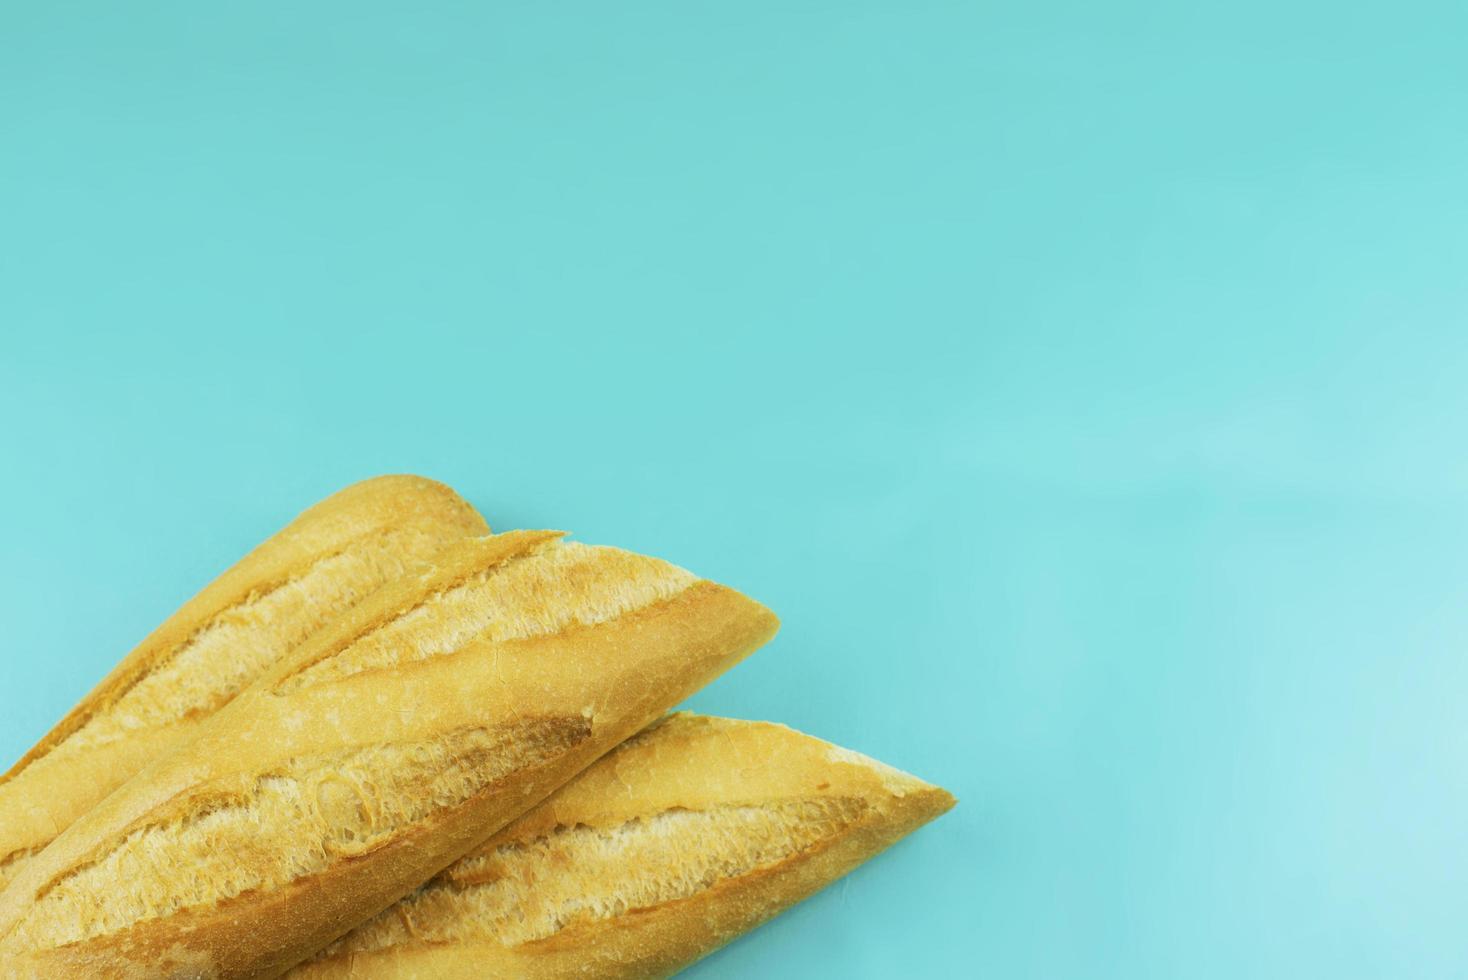 three French baguettes in the left lower corner on a light blue background photo